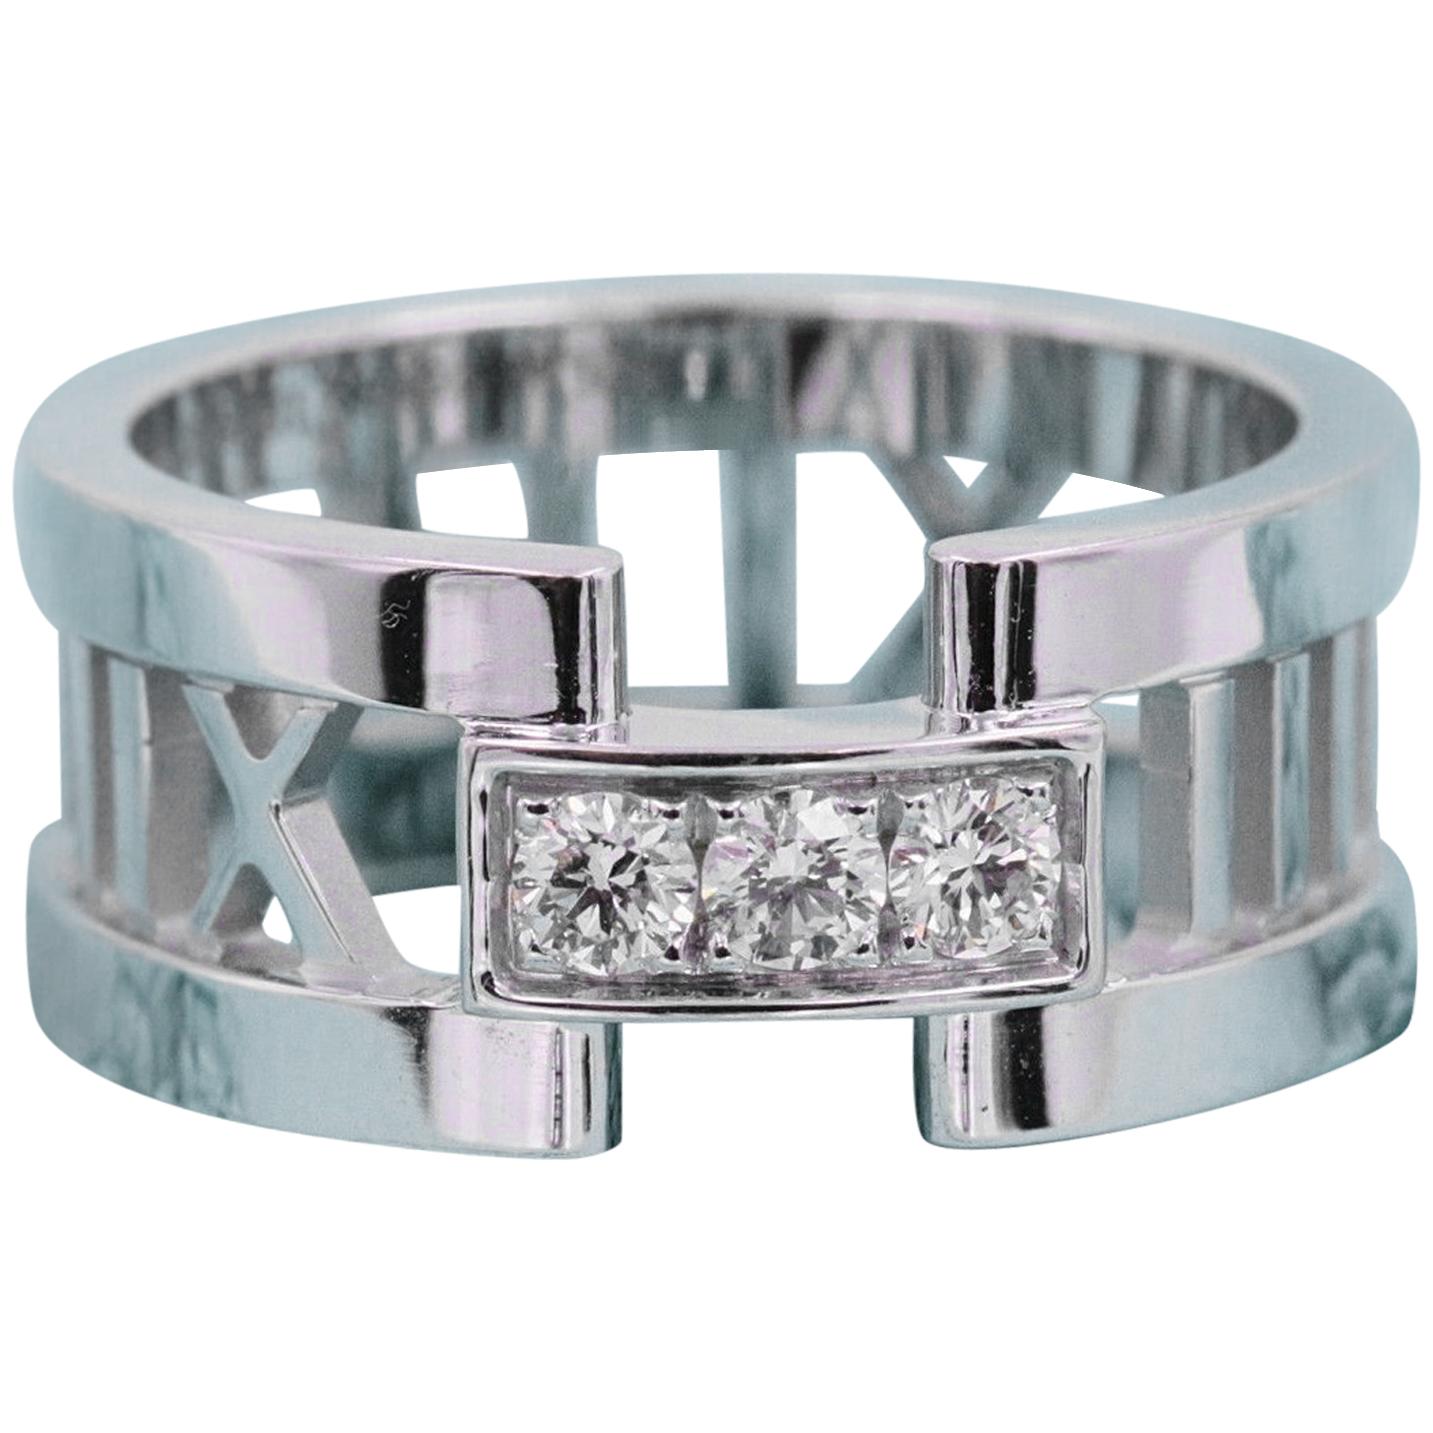 Tiffany & Co.
Style:  Atlas Open Band Ring with Diamonds
Metal:  18K White Gold
Width:  8 MM
Size:  5.25 
Diamonds:  3 Round Brilliant Diamonds weighing 0.19 tcw G color, SI clarity
Hallmark:  ATLAS ©2003 TIFFANY&CO. 750 ITALY
Includes:  T&C Jewelry